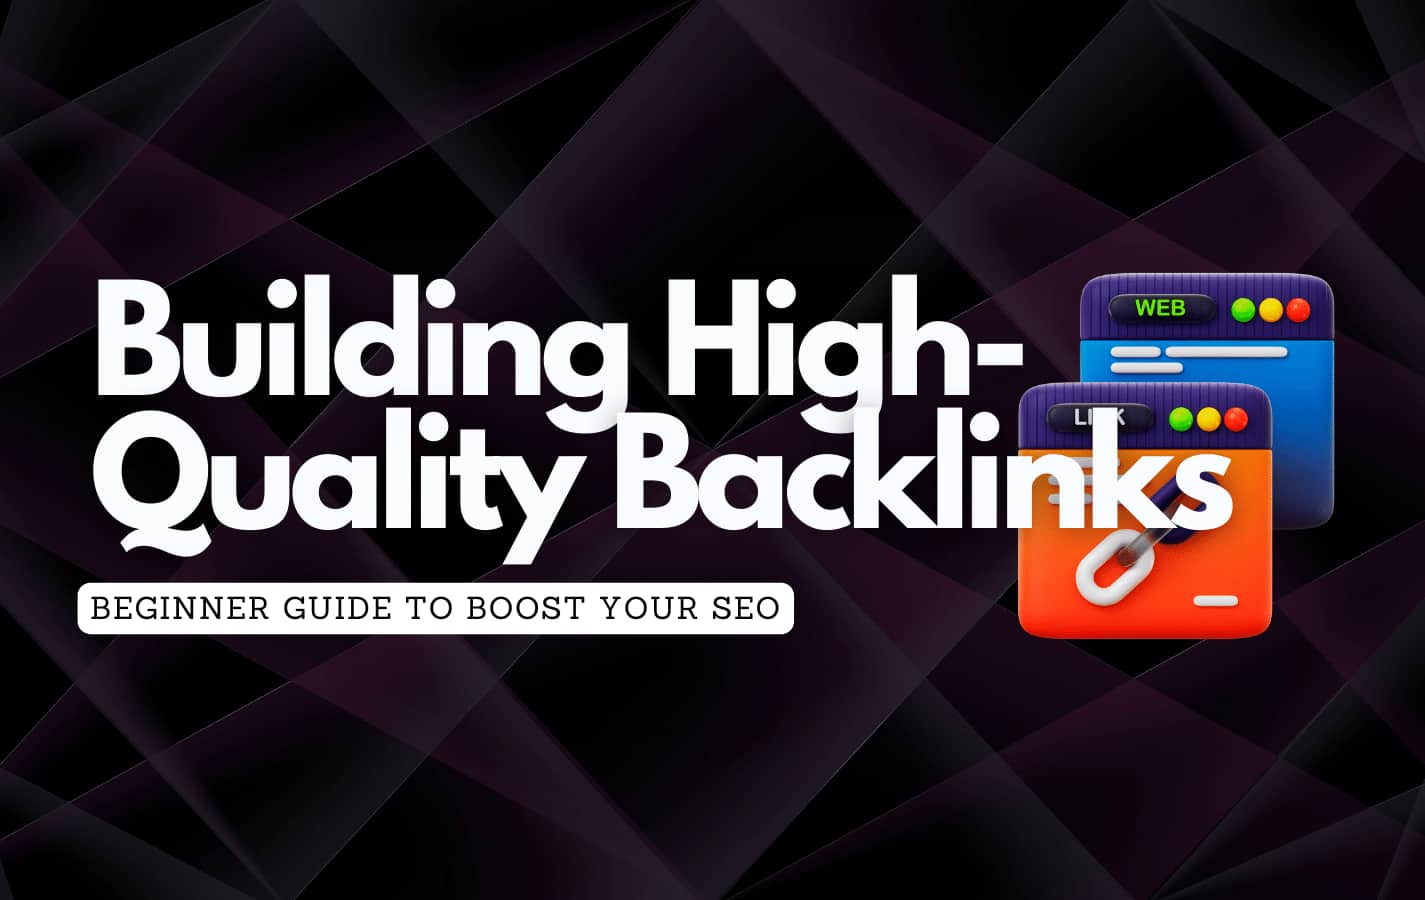 web links image against a dark background with the text overlay about building high quality backlinks to grow your business